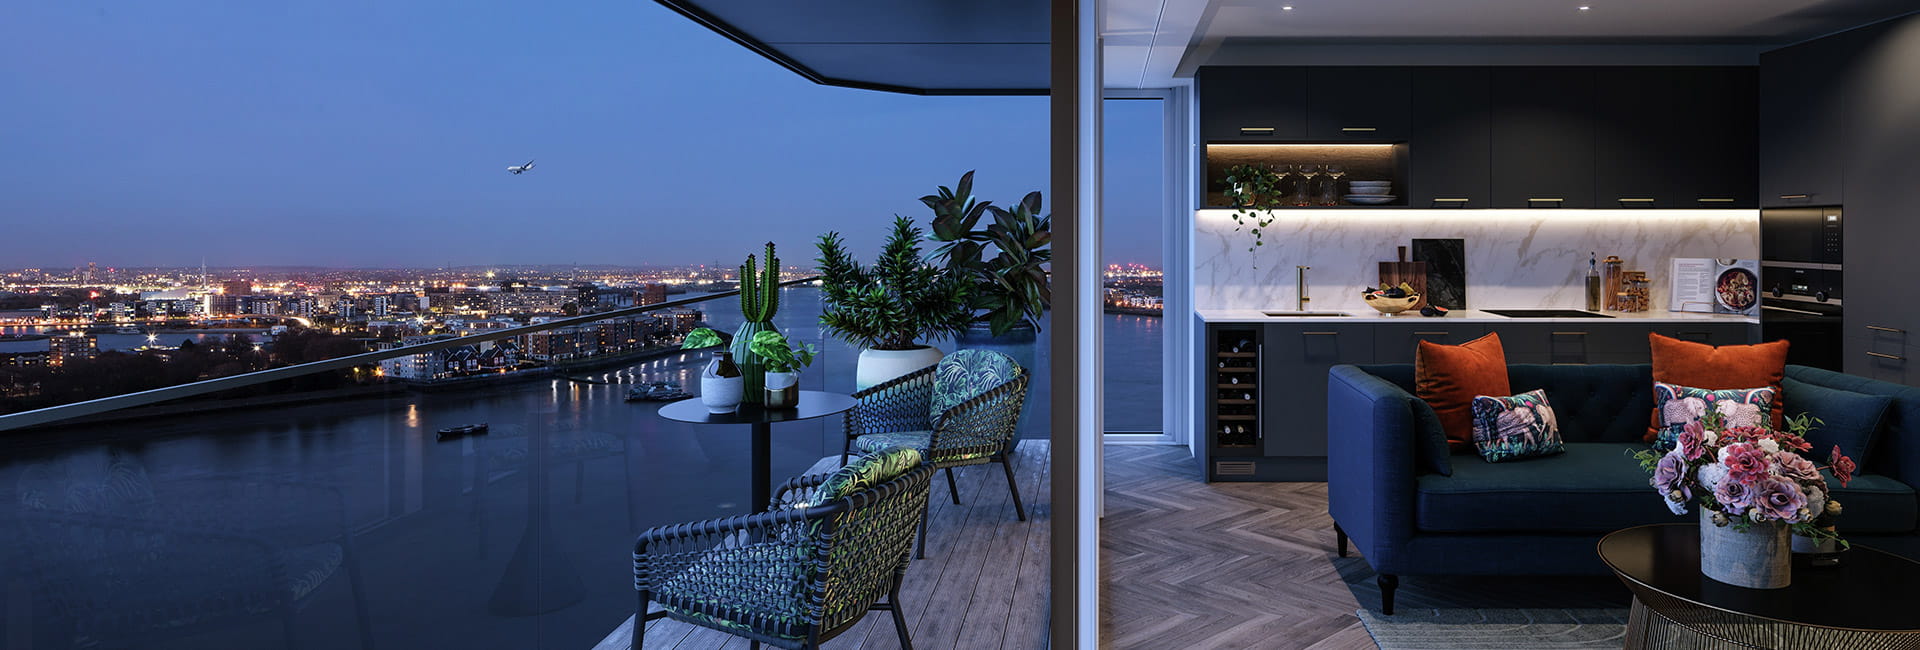 Image of balcony view and kitchen of apartment in Royal Arsenal Riverside